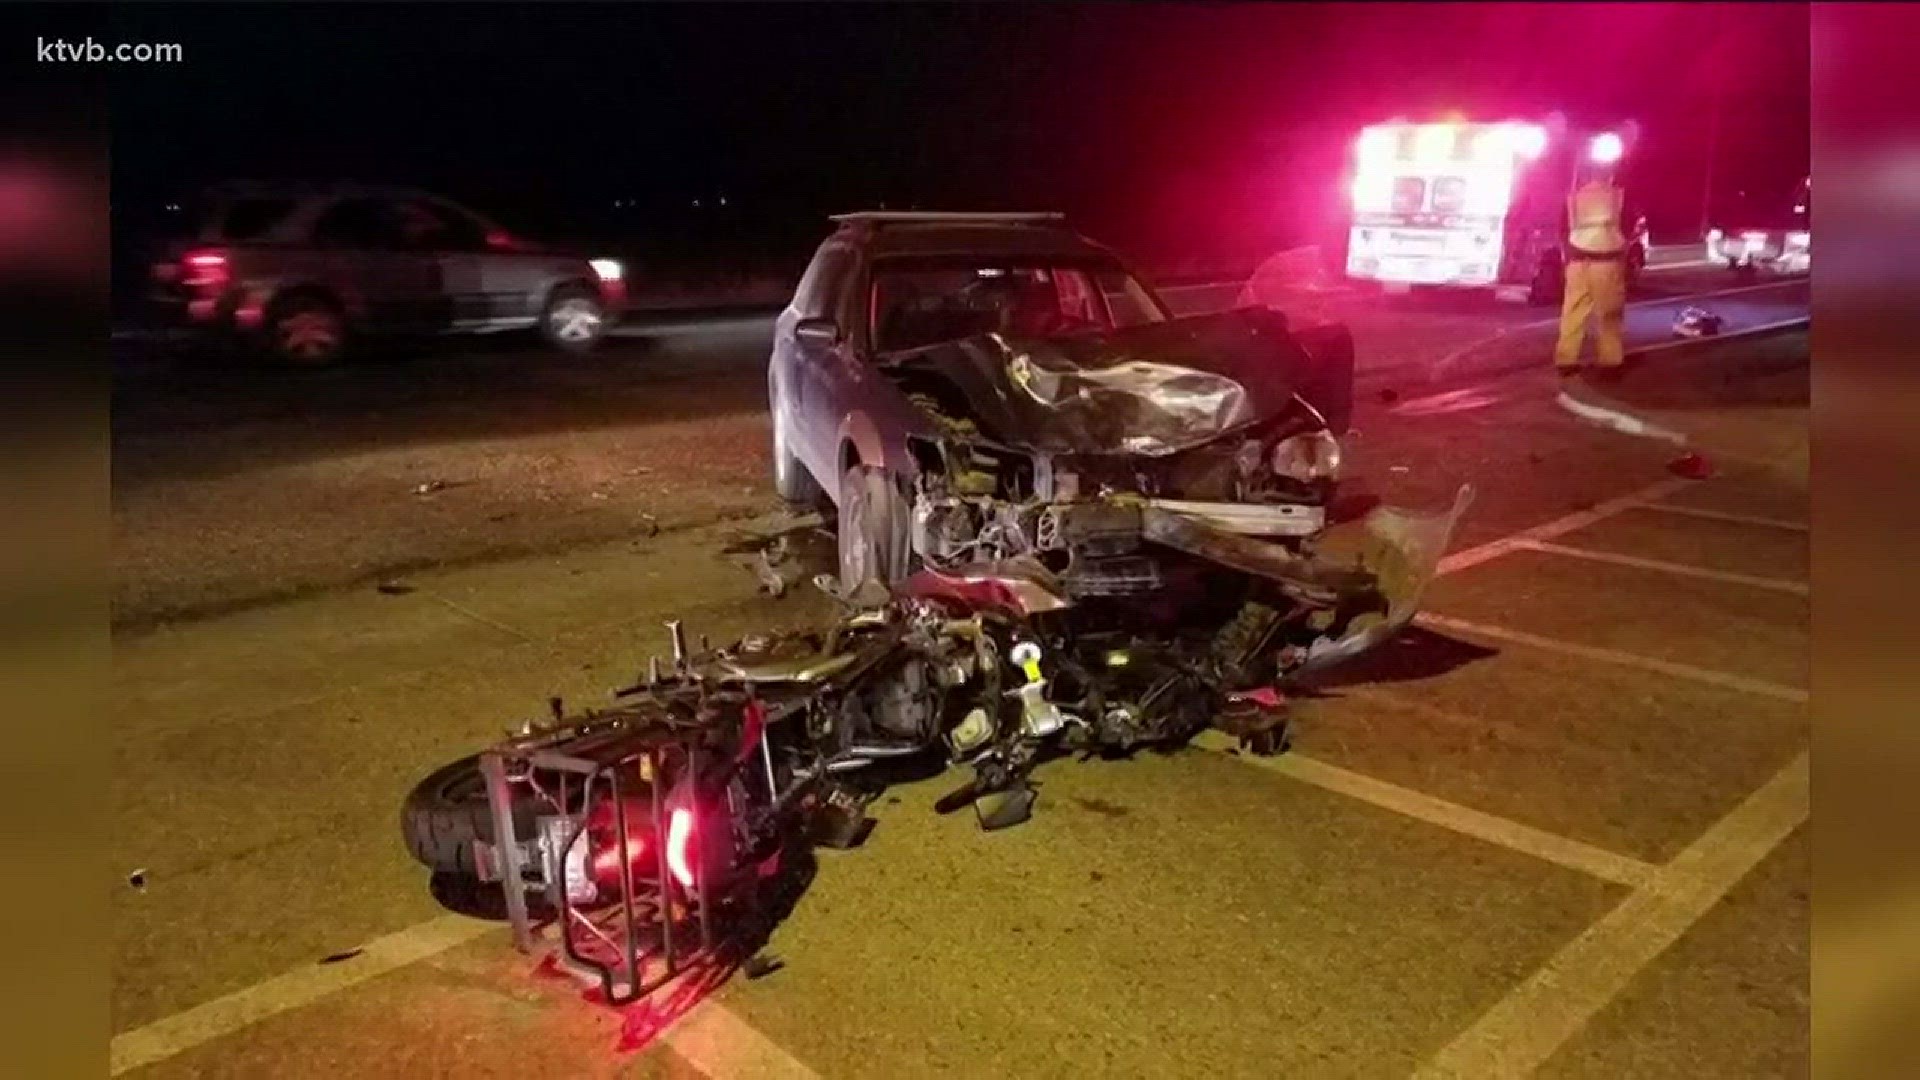 Nampa man urges caution after accident.